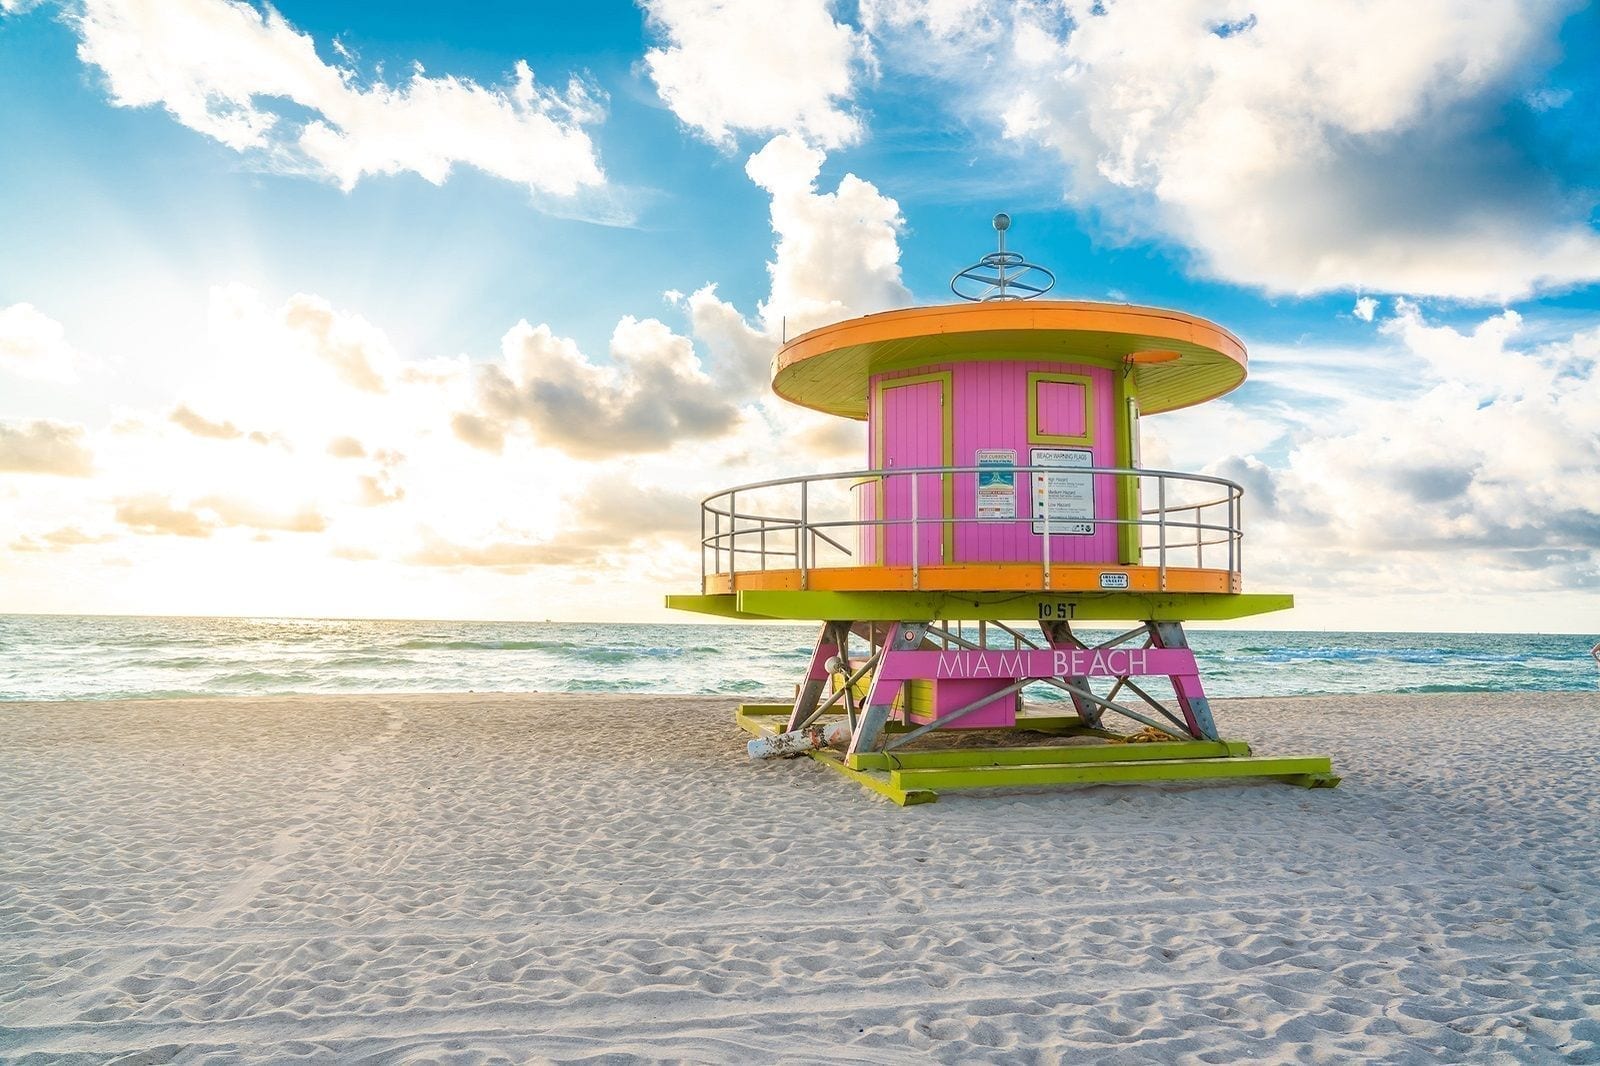 What Airbnb Occupancy Rate Can You Expect in Florida in 2020?